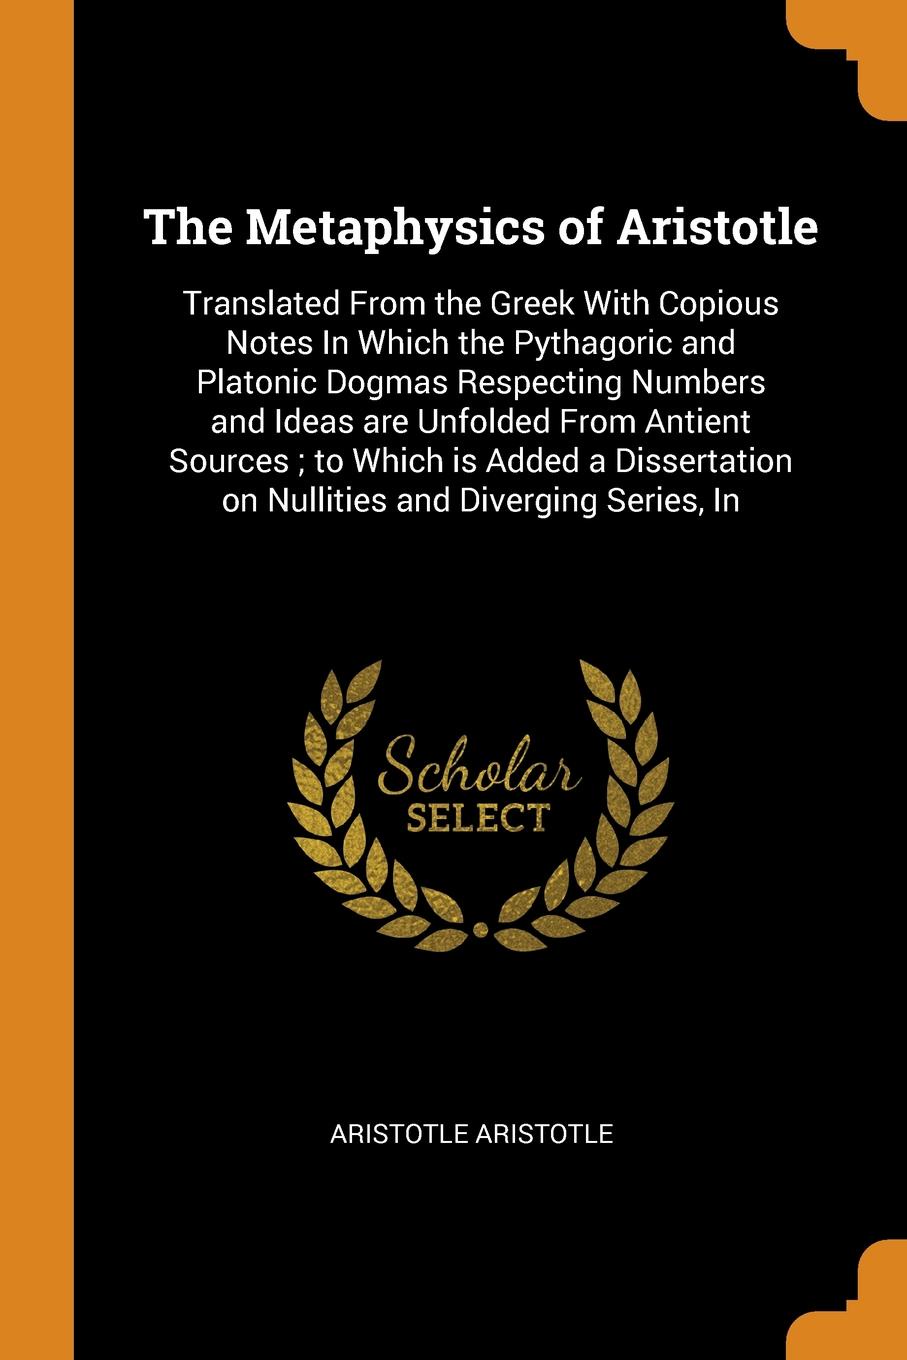 The Metaphysics of Aristotle. Translated From the Greek With Copious Notes In Which the Pythagoric and Platonic Dogmas Respecting Numbers and Ideas are Unfolded From Antient Sources ; to Which is Added a Dissertation on Nullities and Diverging Ser...